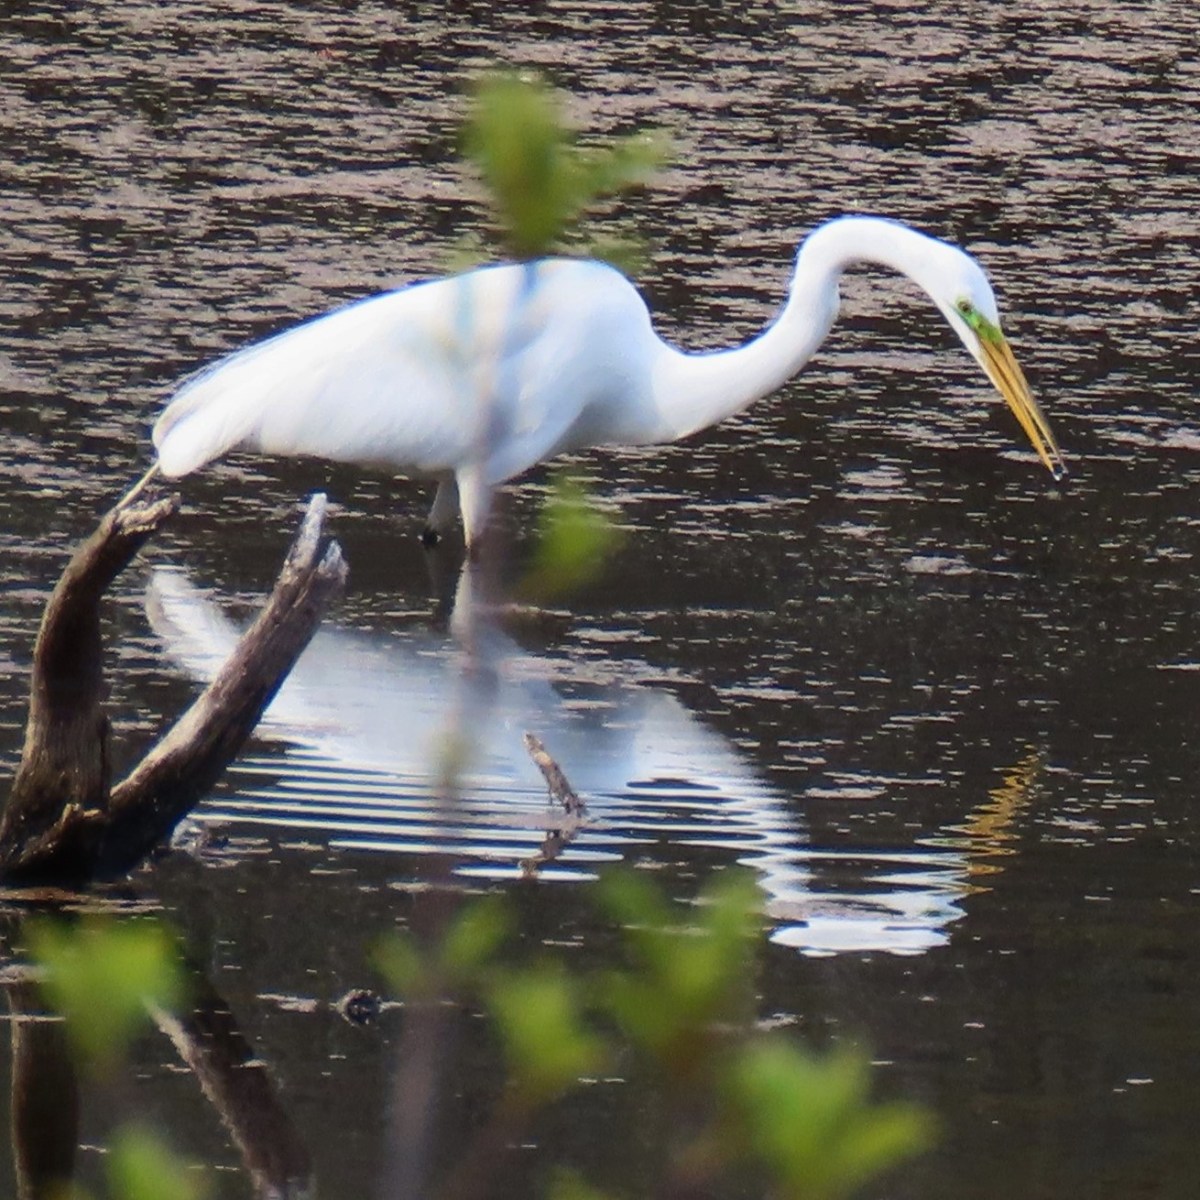 A Great Egret stabs its beak down into the water